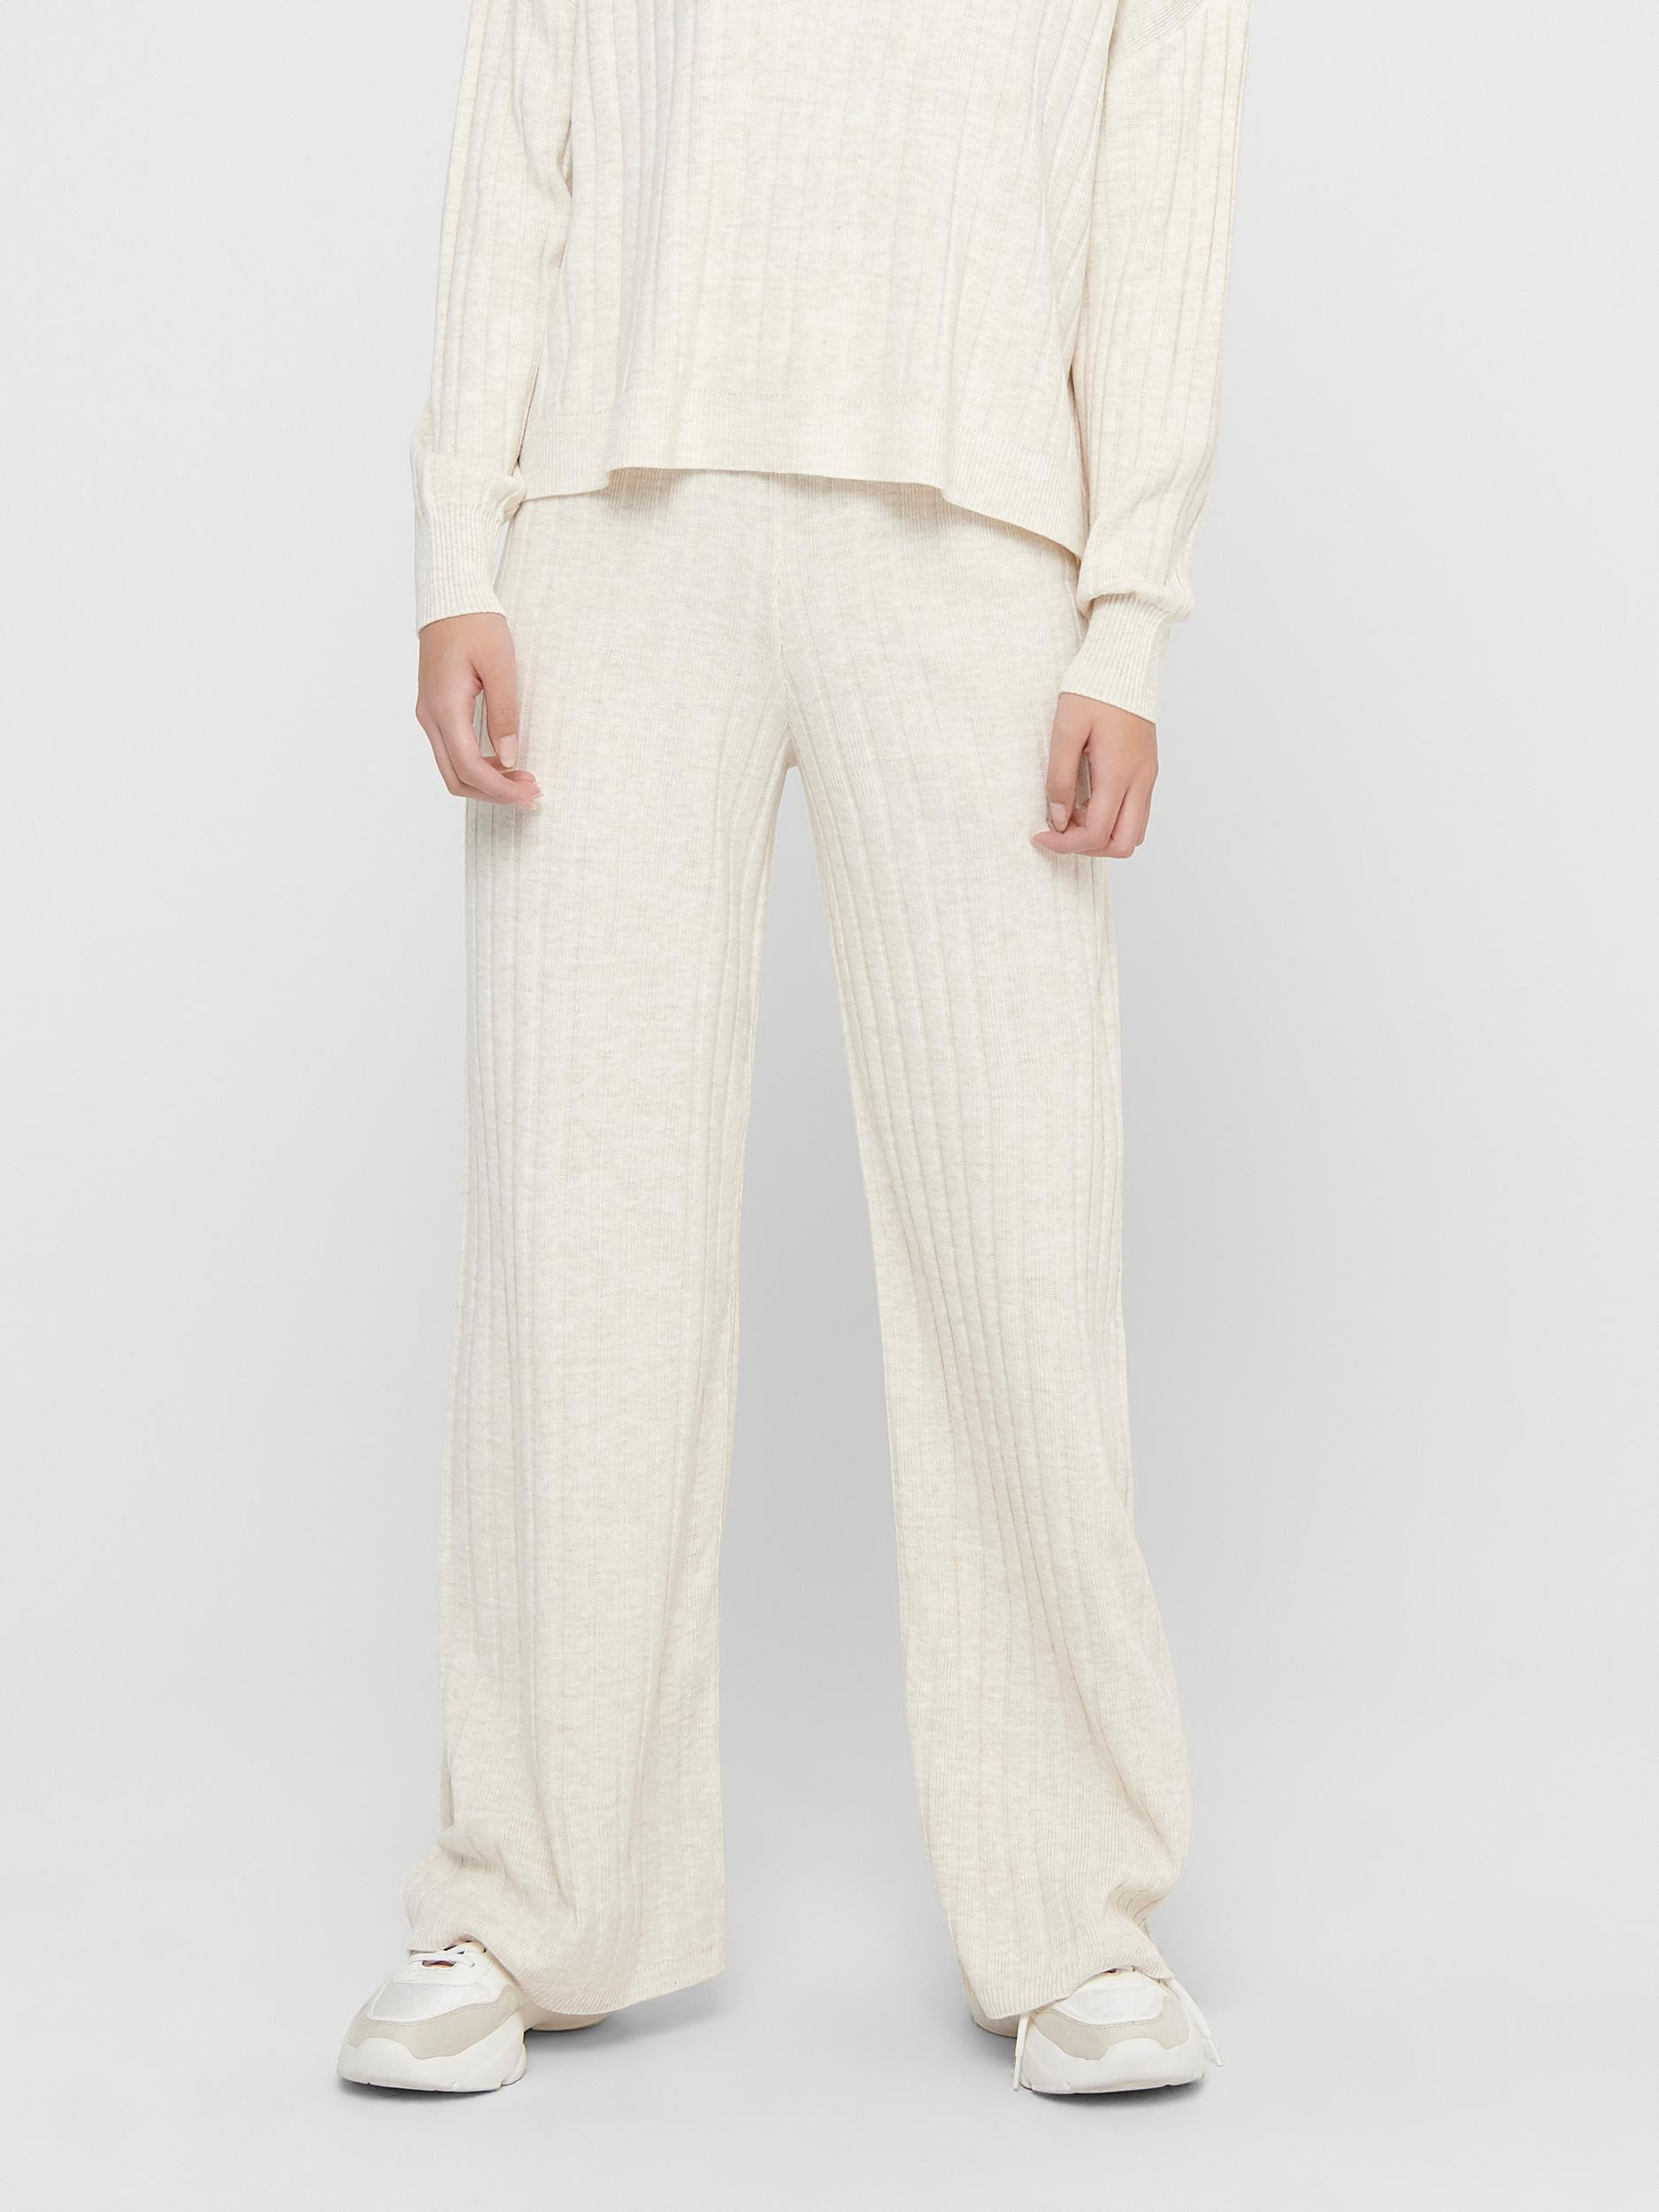 high-waisted trousers, White, large image number 3